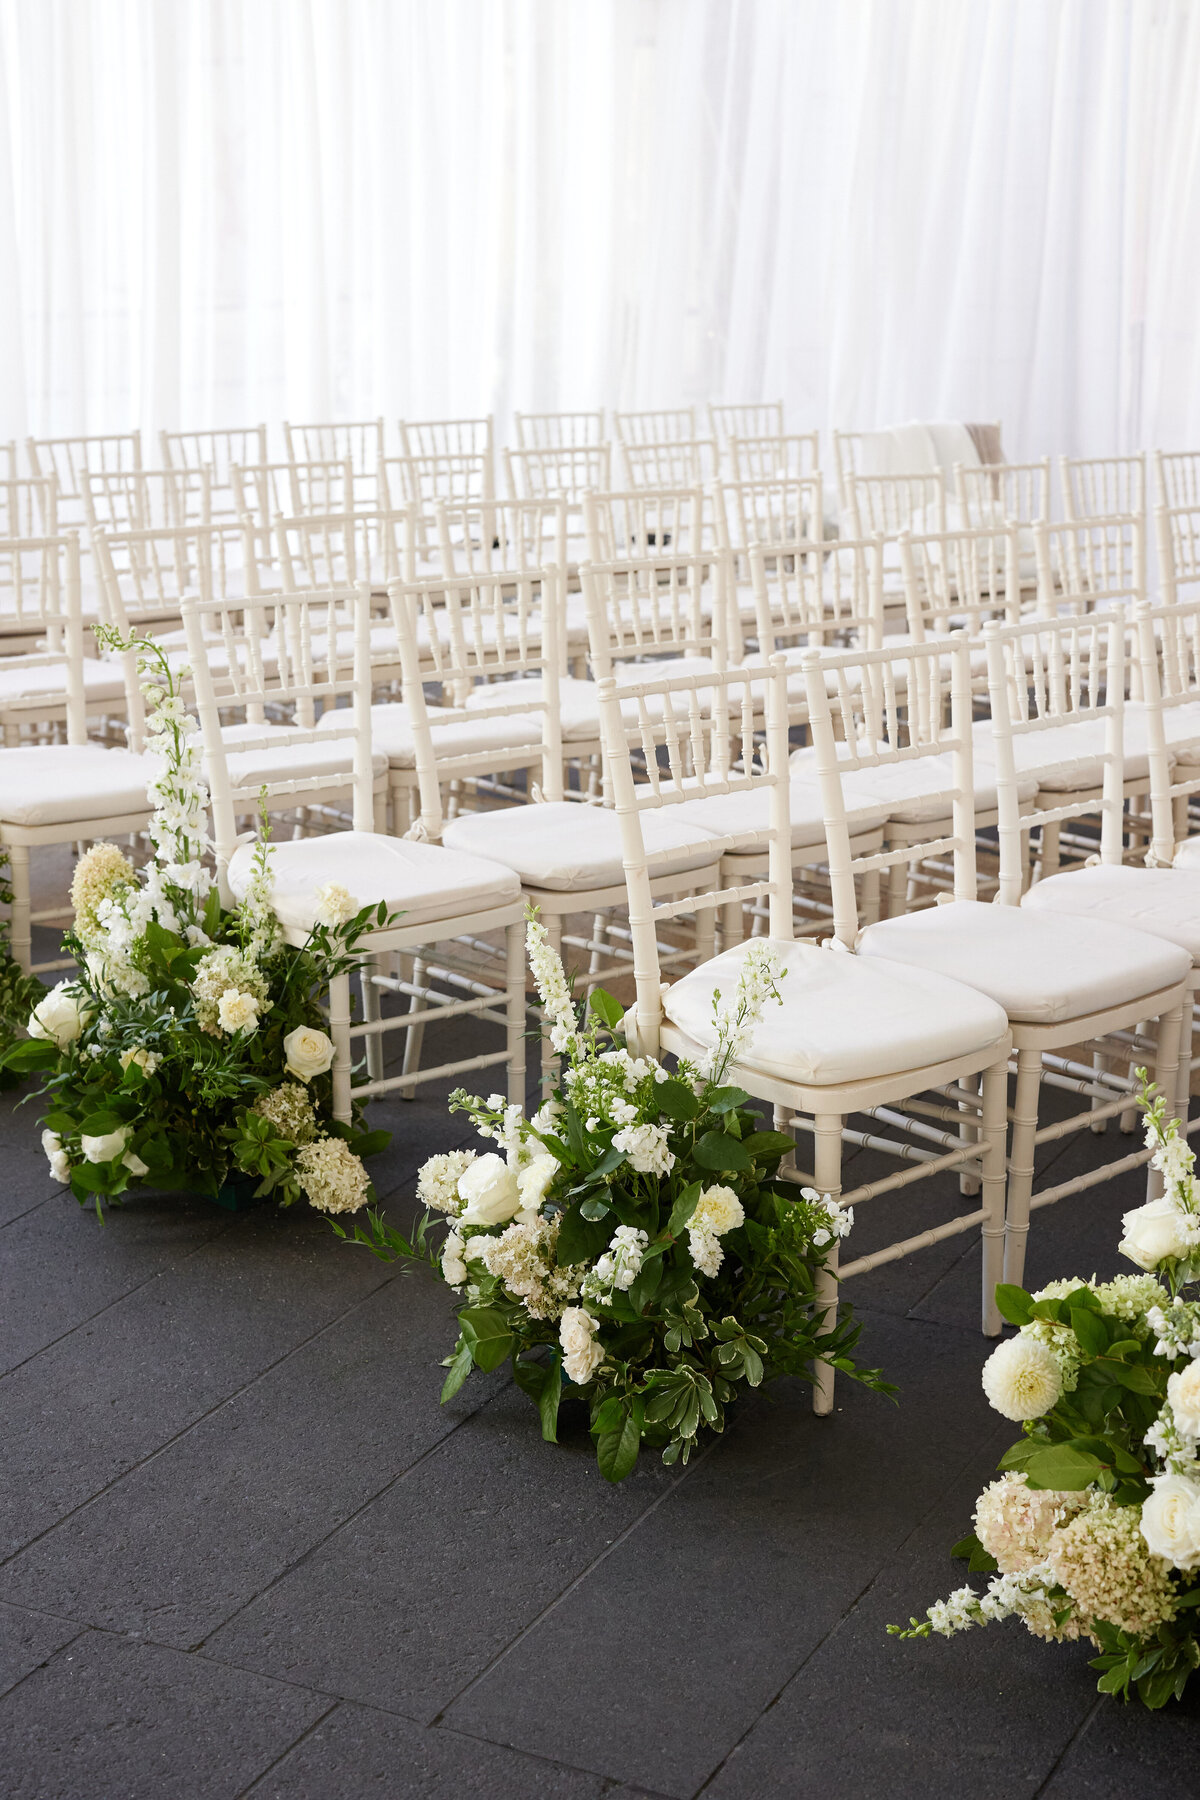 Wedding ceremony details and seating